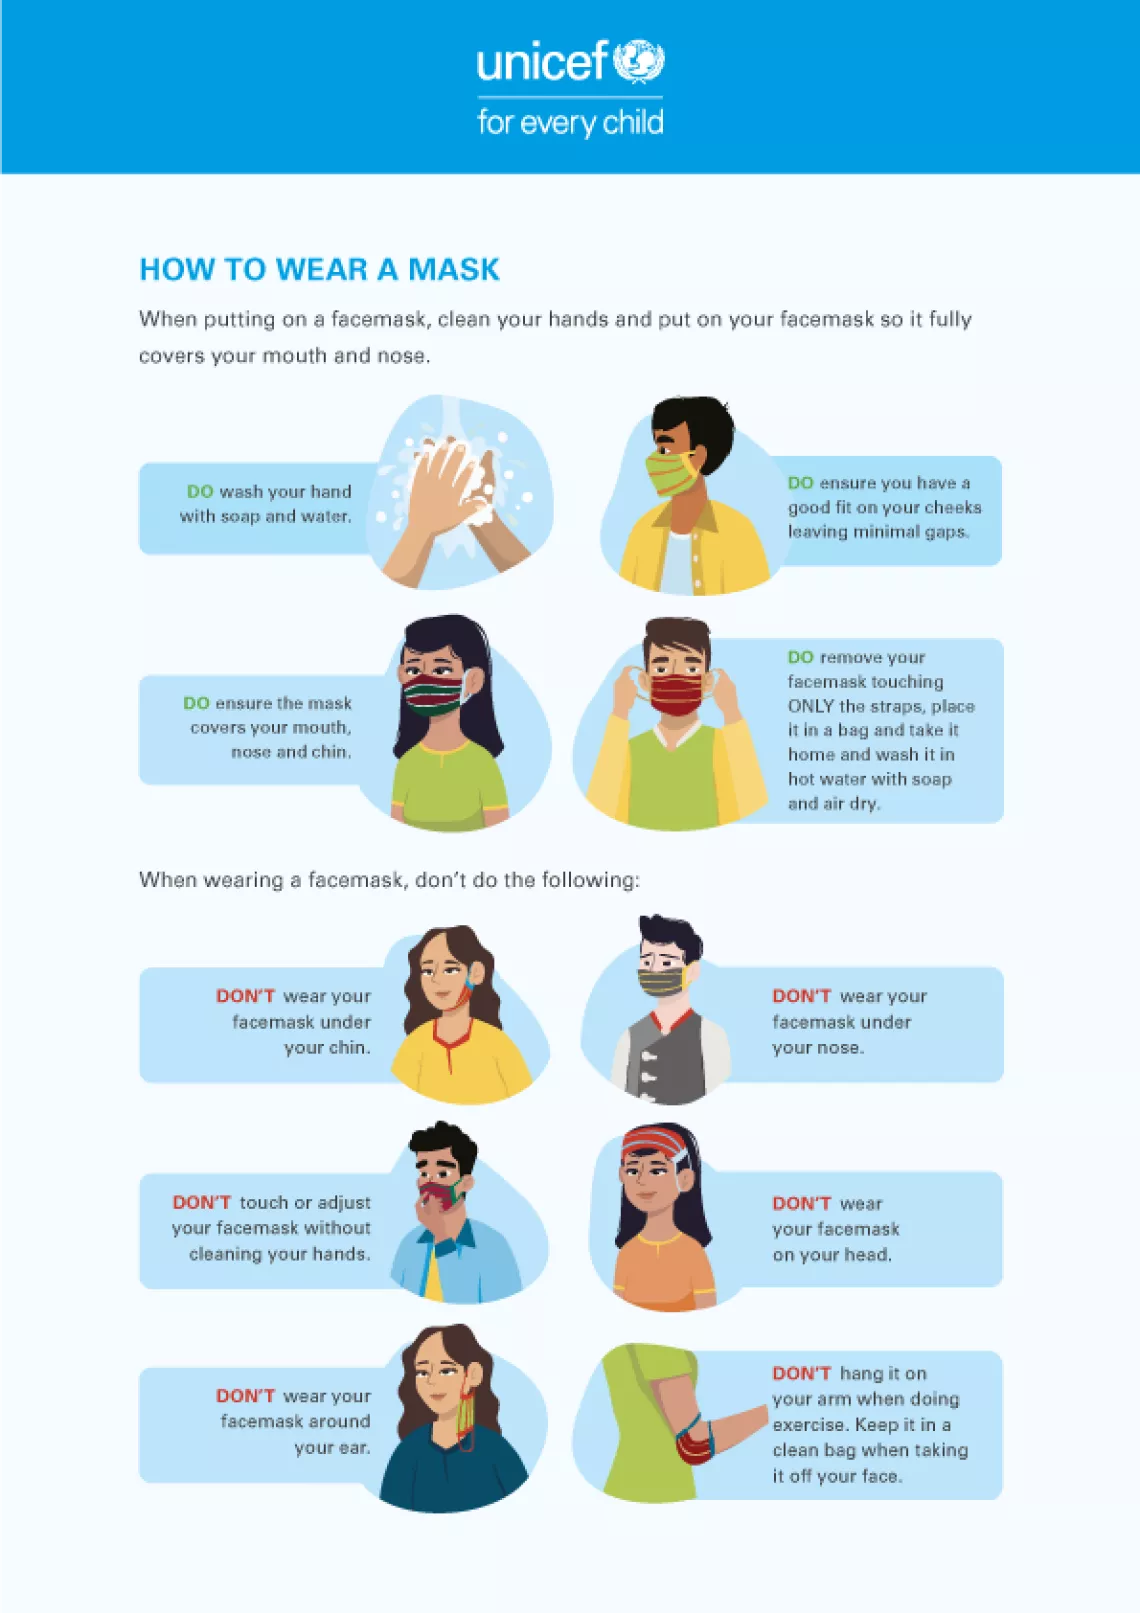 HOW TO WEAR A MASK - 1